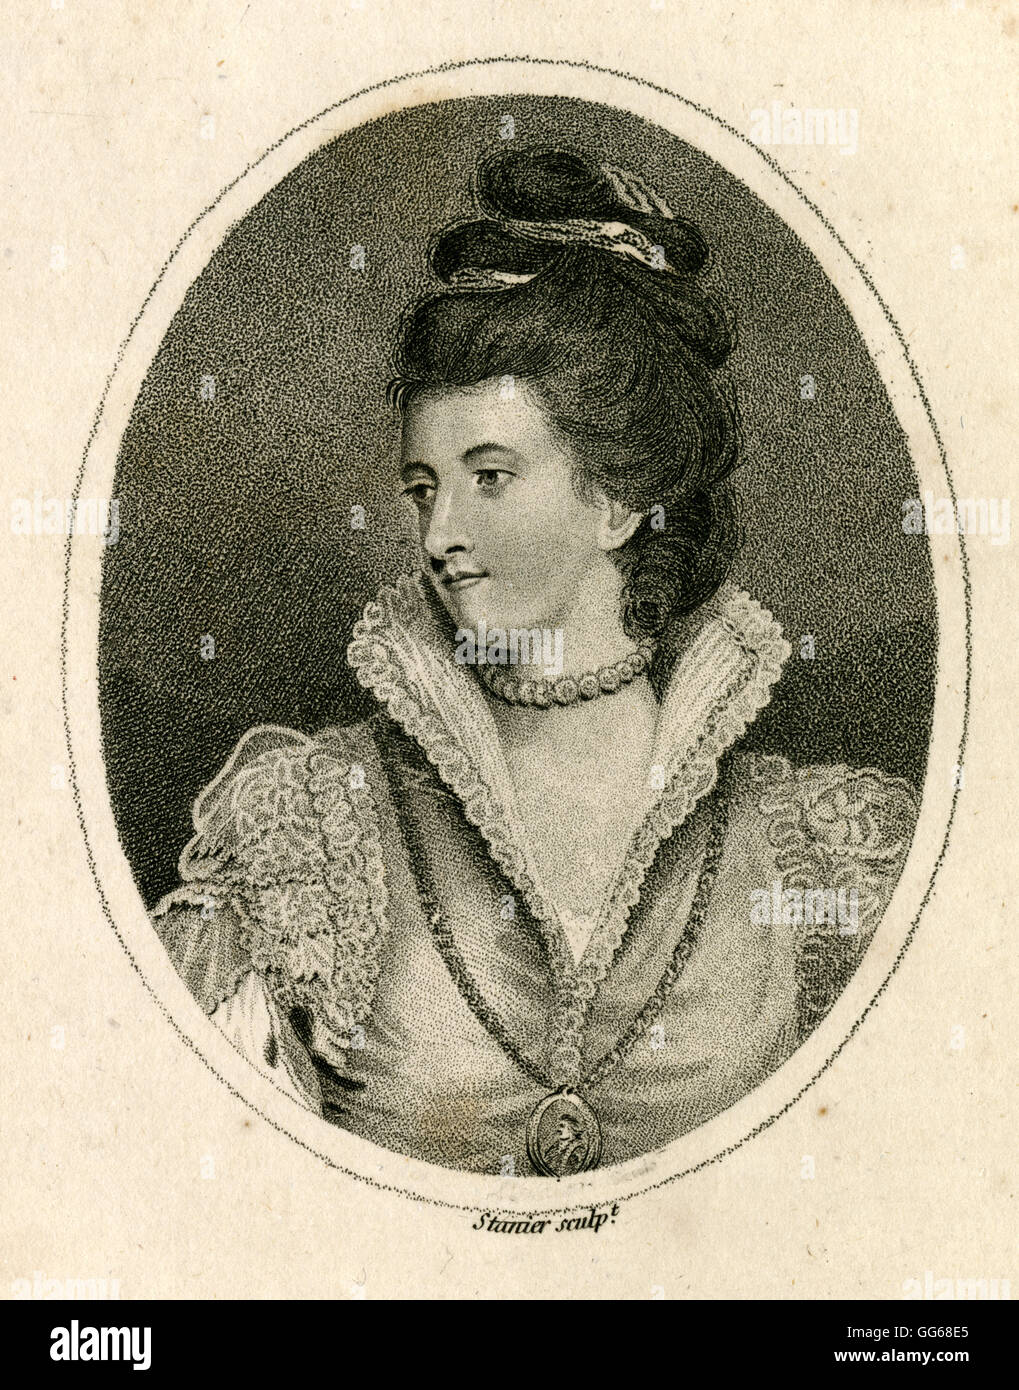 Antique 1791 engraving, Jane Gordon, Duchess of Gordon. Jane Gordon (1749-1812), née Lady Jane Maxwell, was a Scottish Tory political hostess. Together with her husband Alexander, 4th Duke of Gordon and her son George, Marquess of Huntly, the future 5th Duke of Gordon she founded the Gordon Highlanders, a British Army infantry regiment that existed until 1994. SOURCE: ORIGINAL STEEL ENGRAVING. Stock Photo